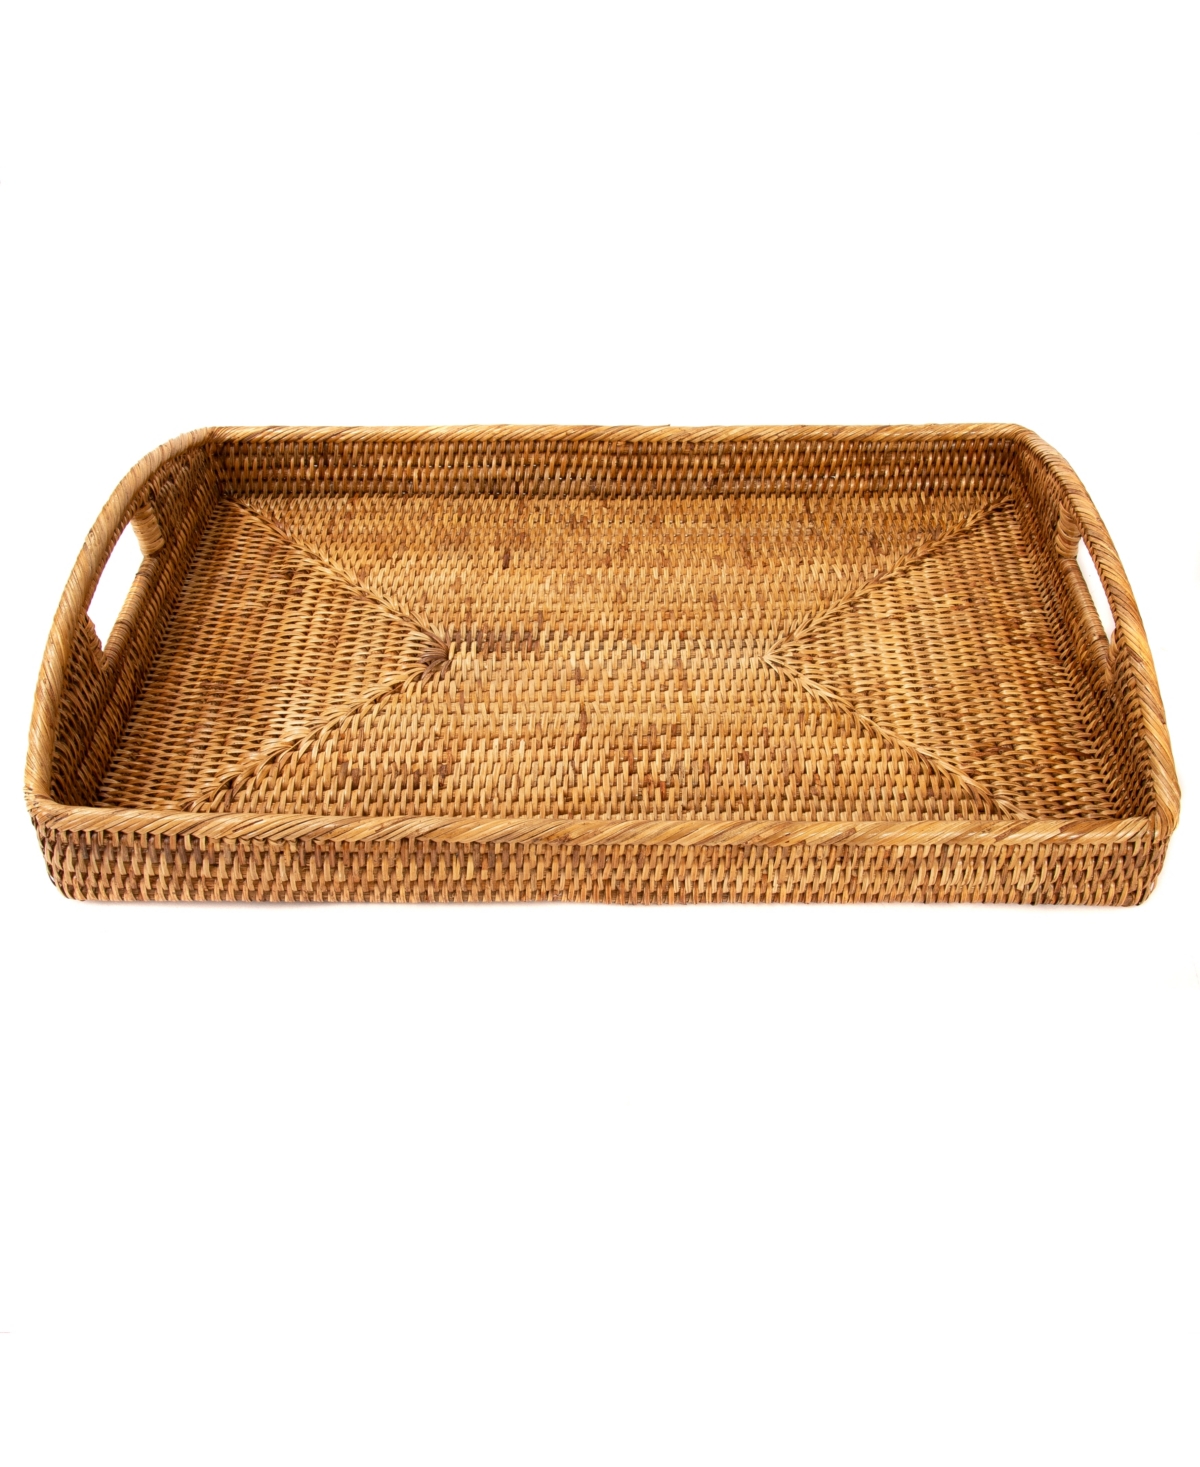 Artifacts Trading Company Artifacts Rattan Rectangular Serving Tray In Honey Brown